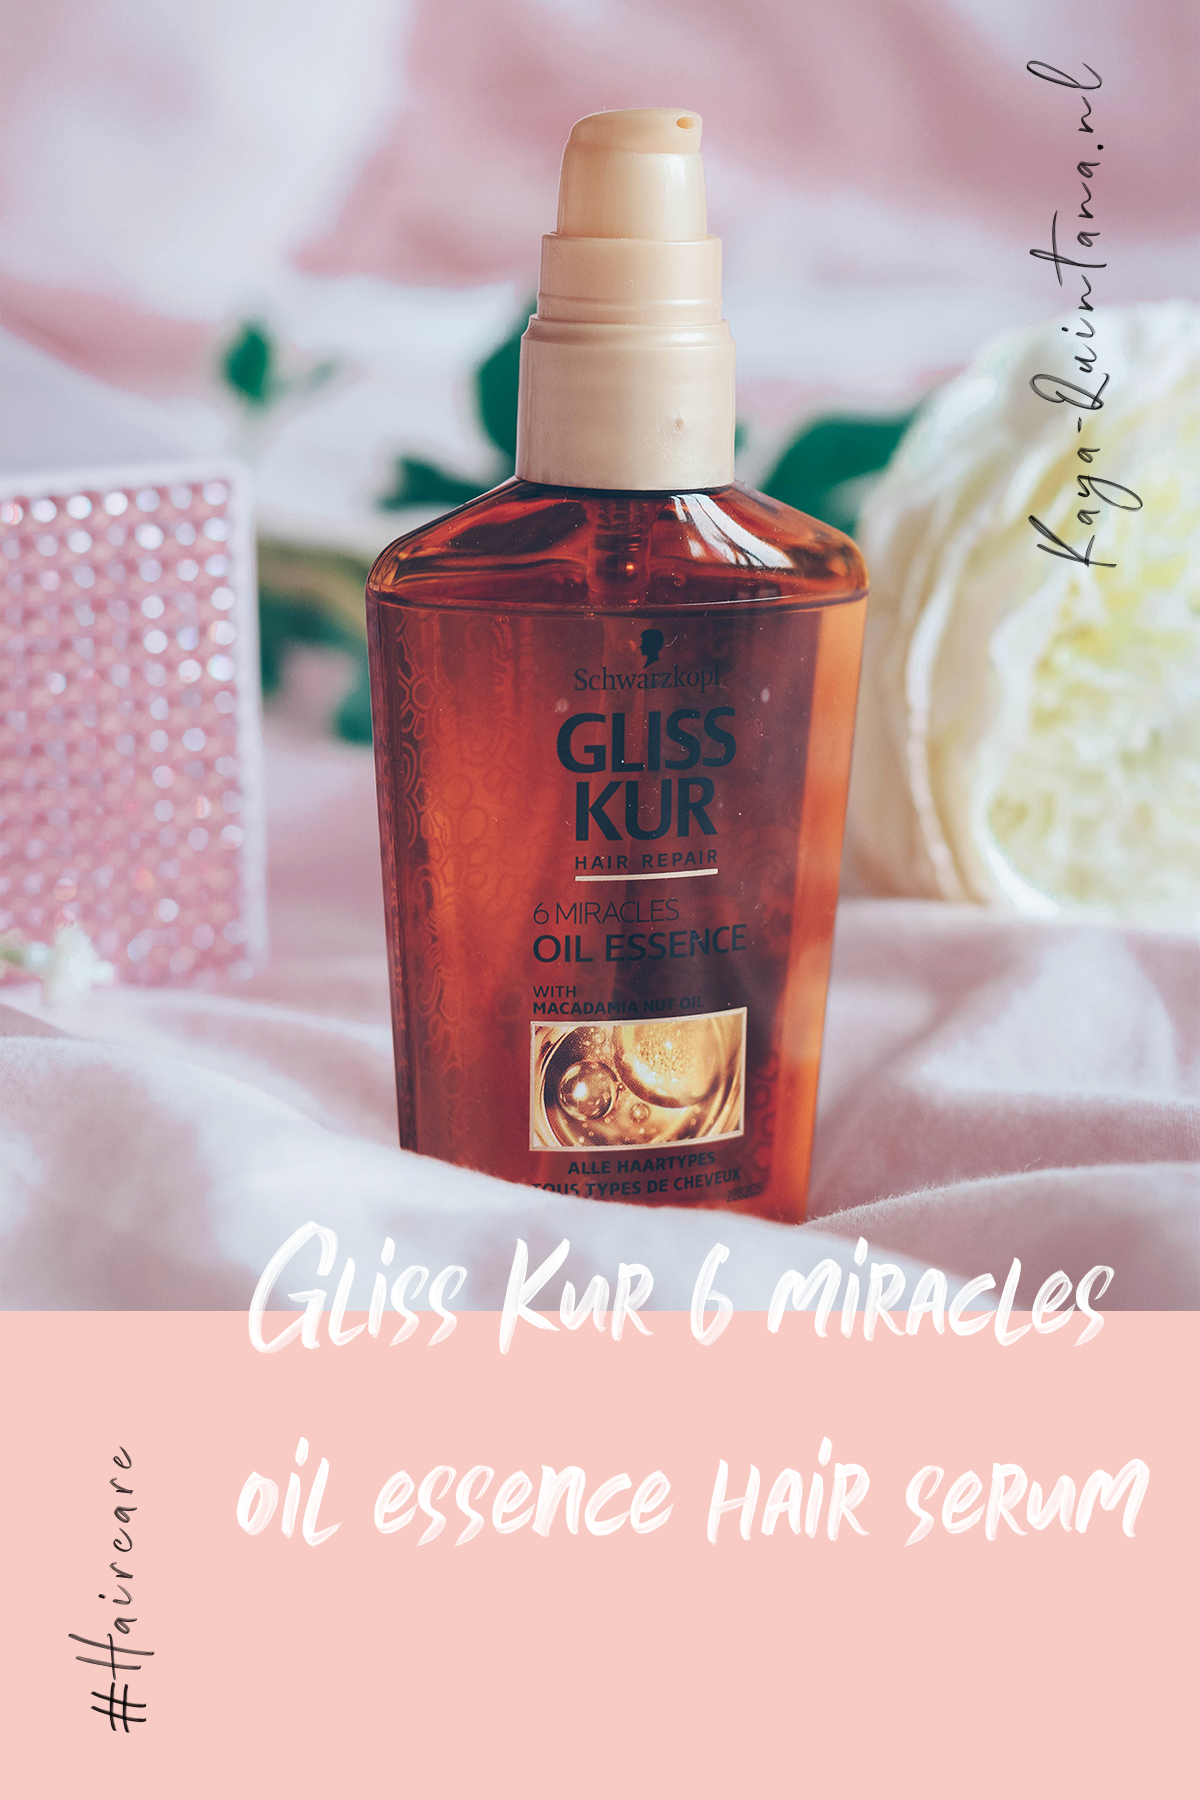 Gliss Kur 6 miracles oil essence review